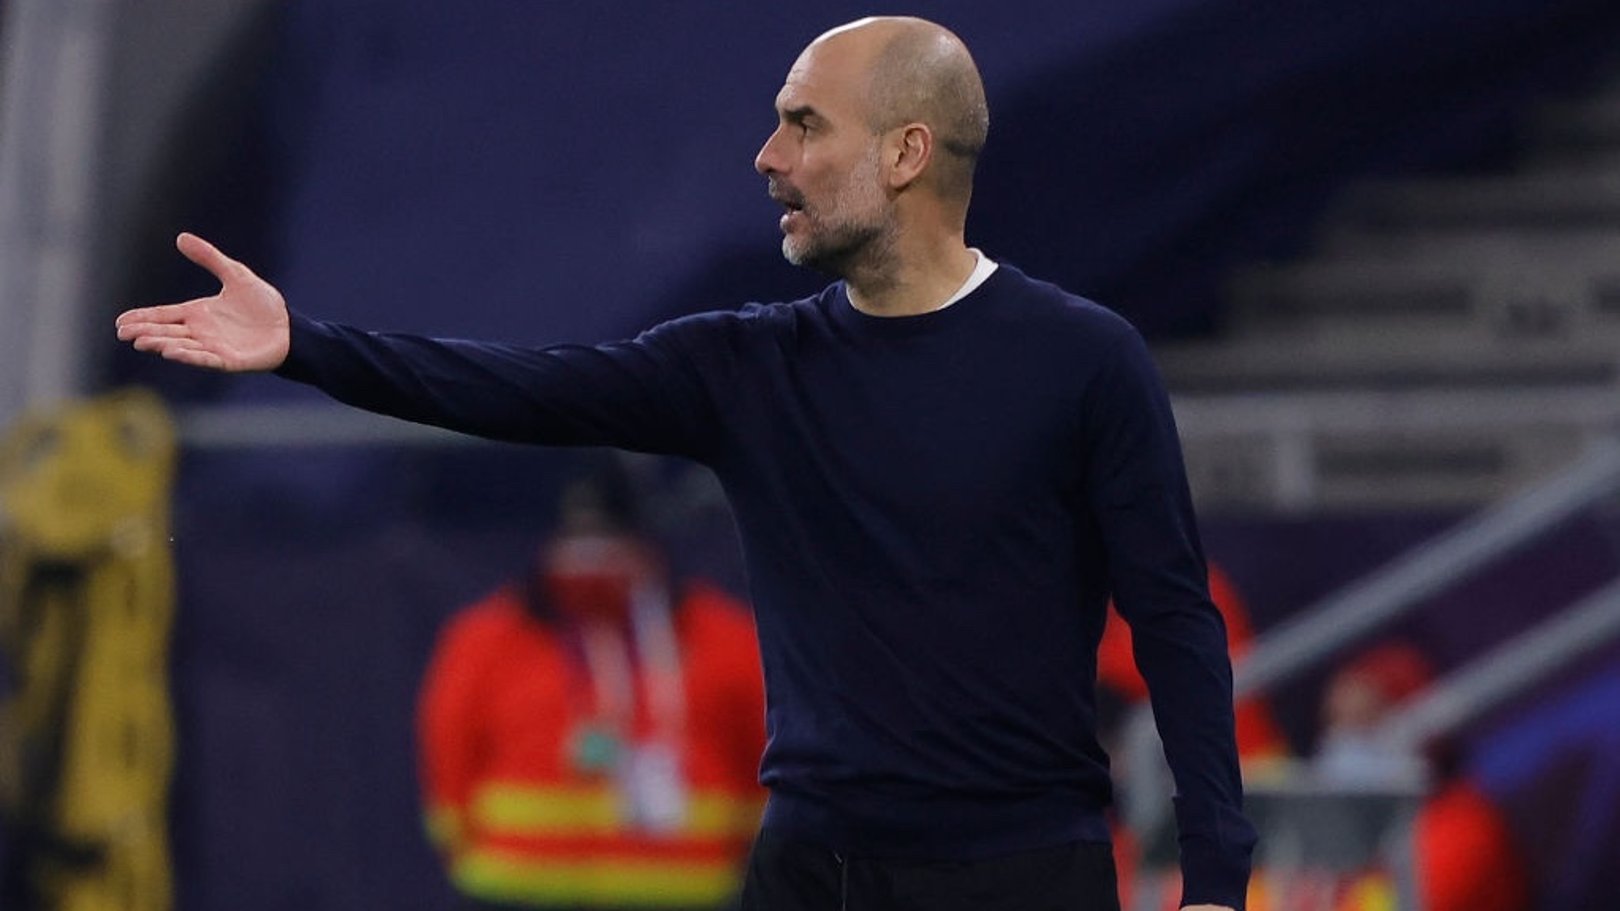 'We must be more clinical' says Guardiola